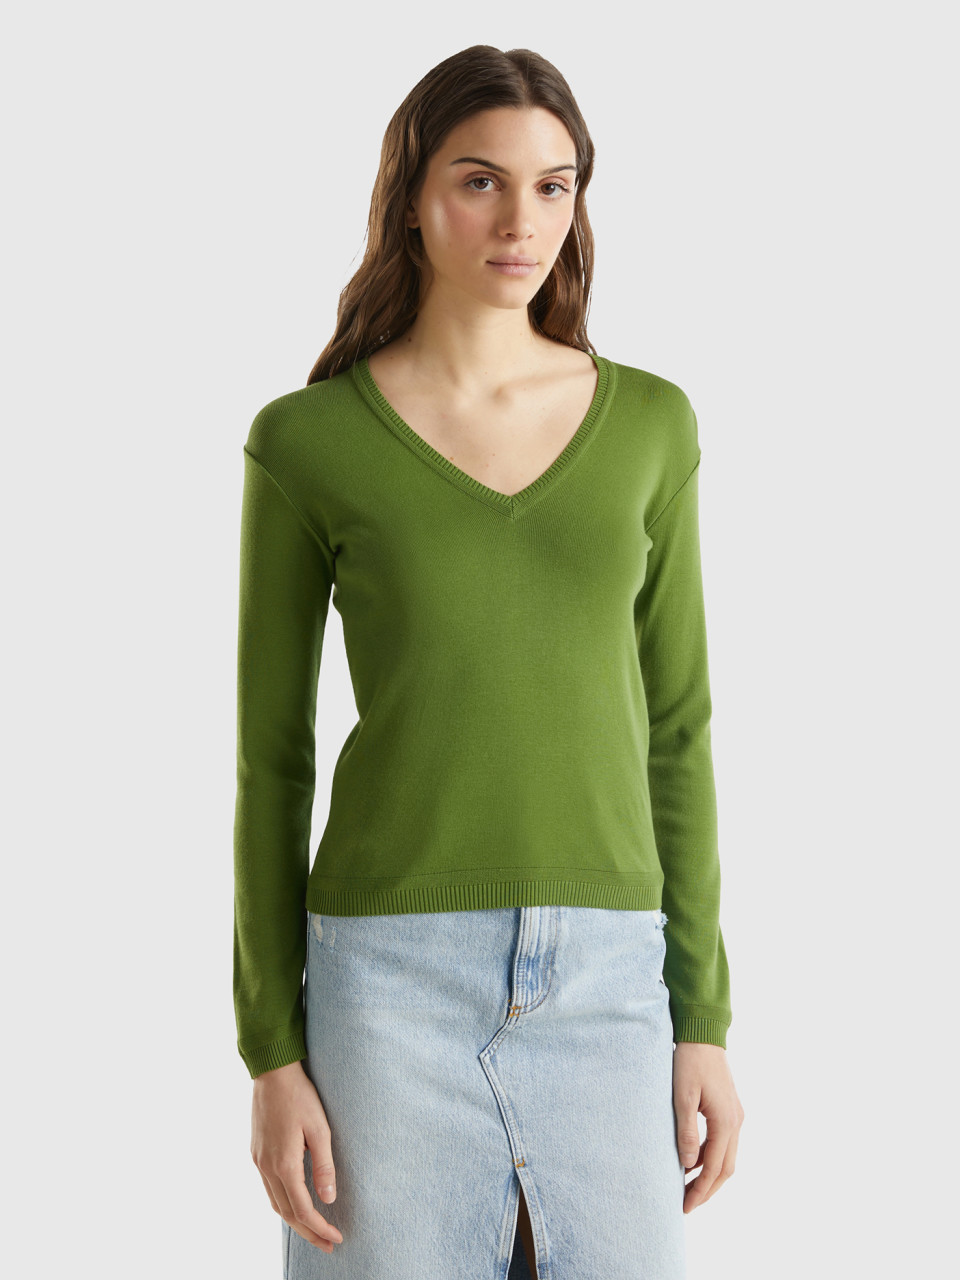 Benetton, V-neck Sweater In Pure Cotton, Military Green, Women